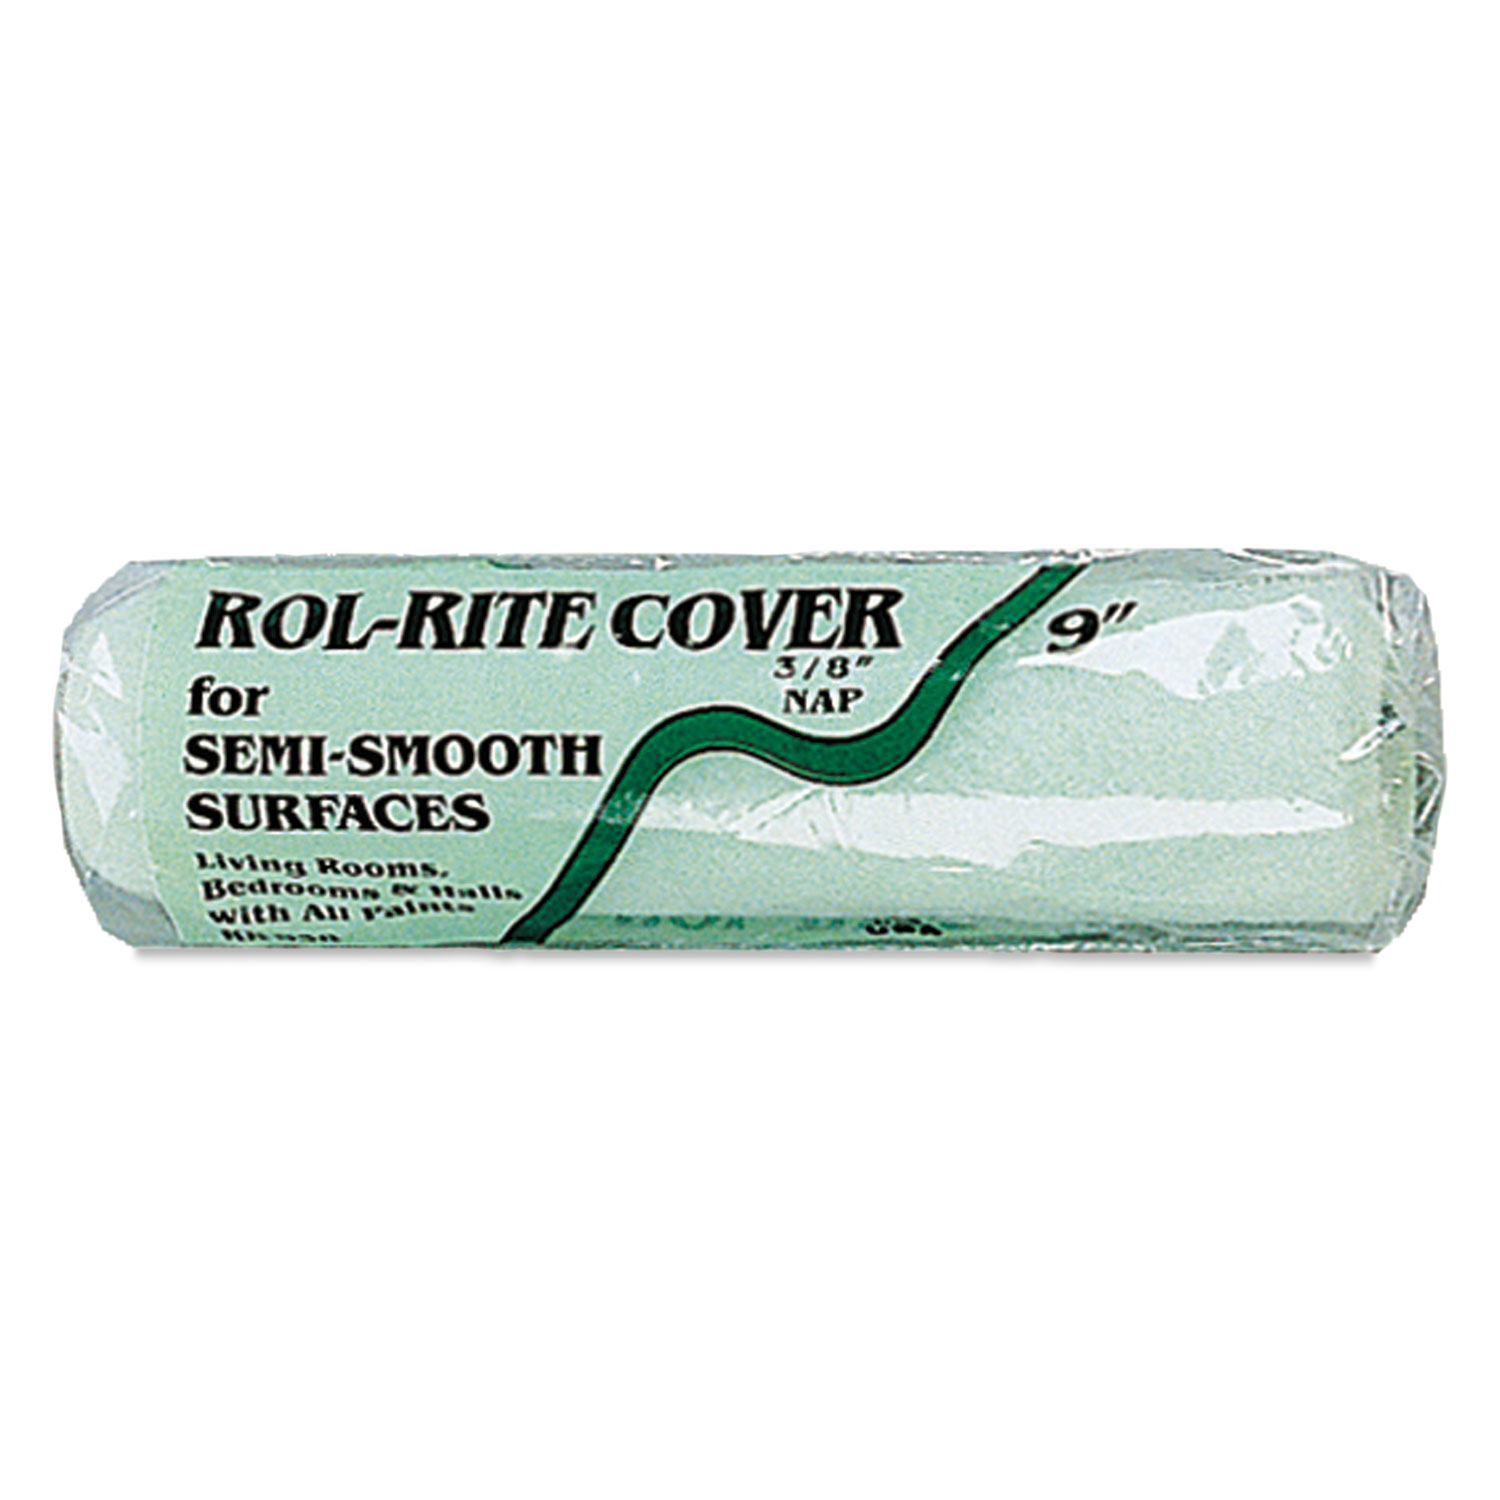 Semi-Smooth Paint Roller Cover, 3/8 Nap, 9, Green